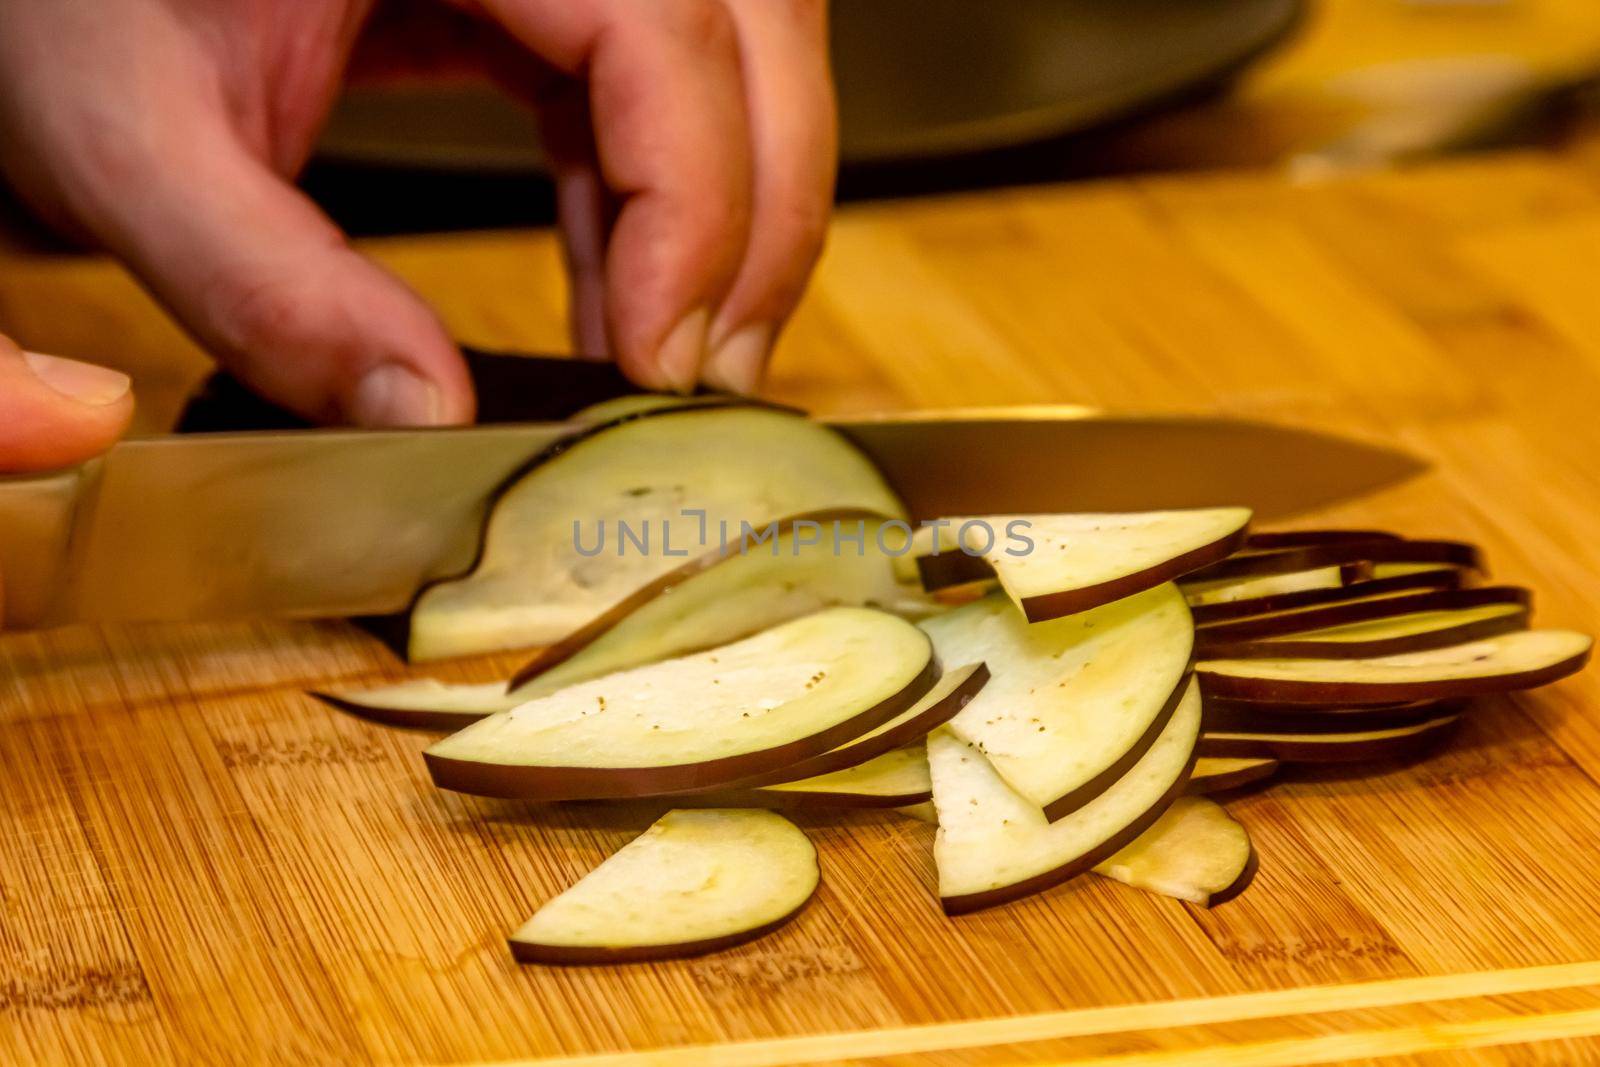 The cook cuts an eggplant on a cutting board. The process of preparing a vegetable dish. Unrecognizable person. Close-up